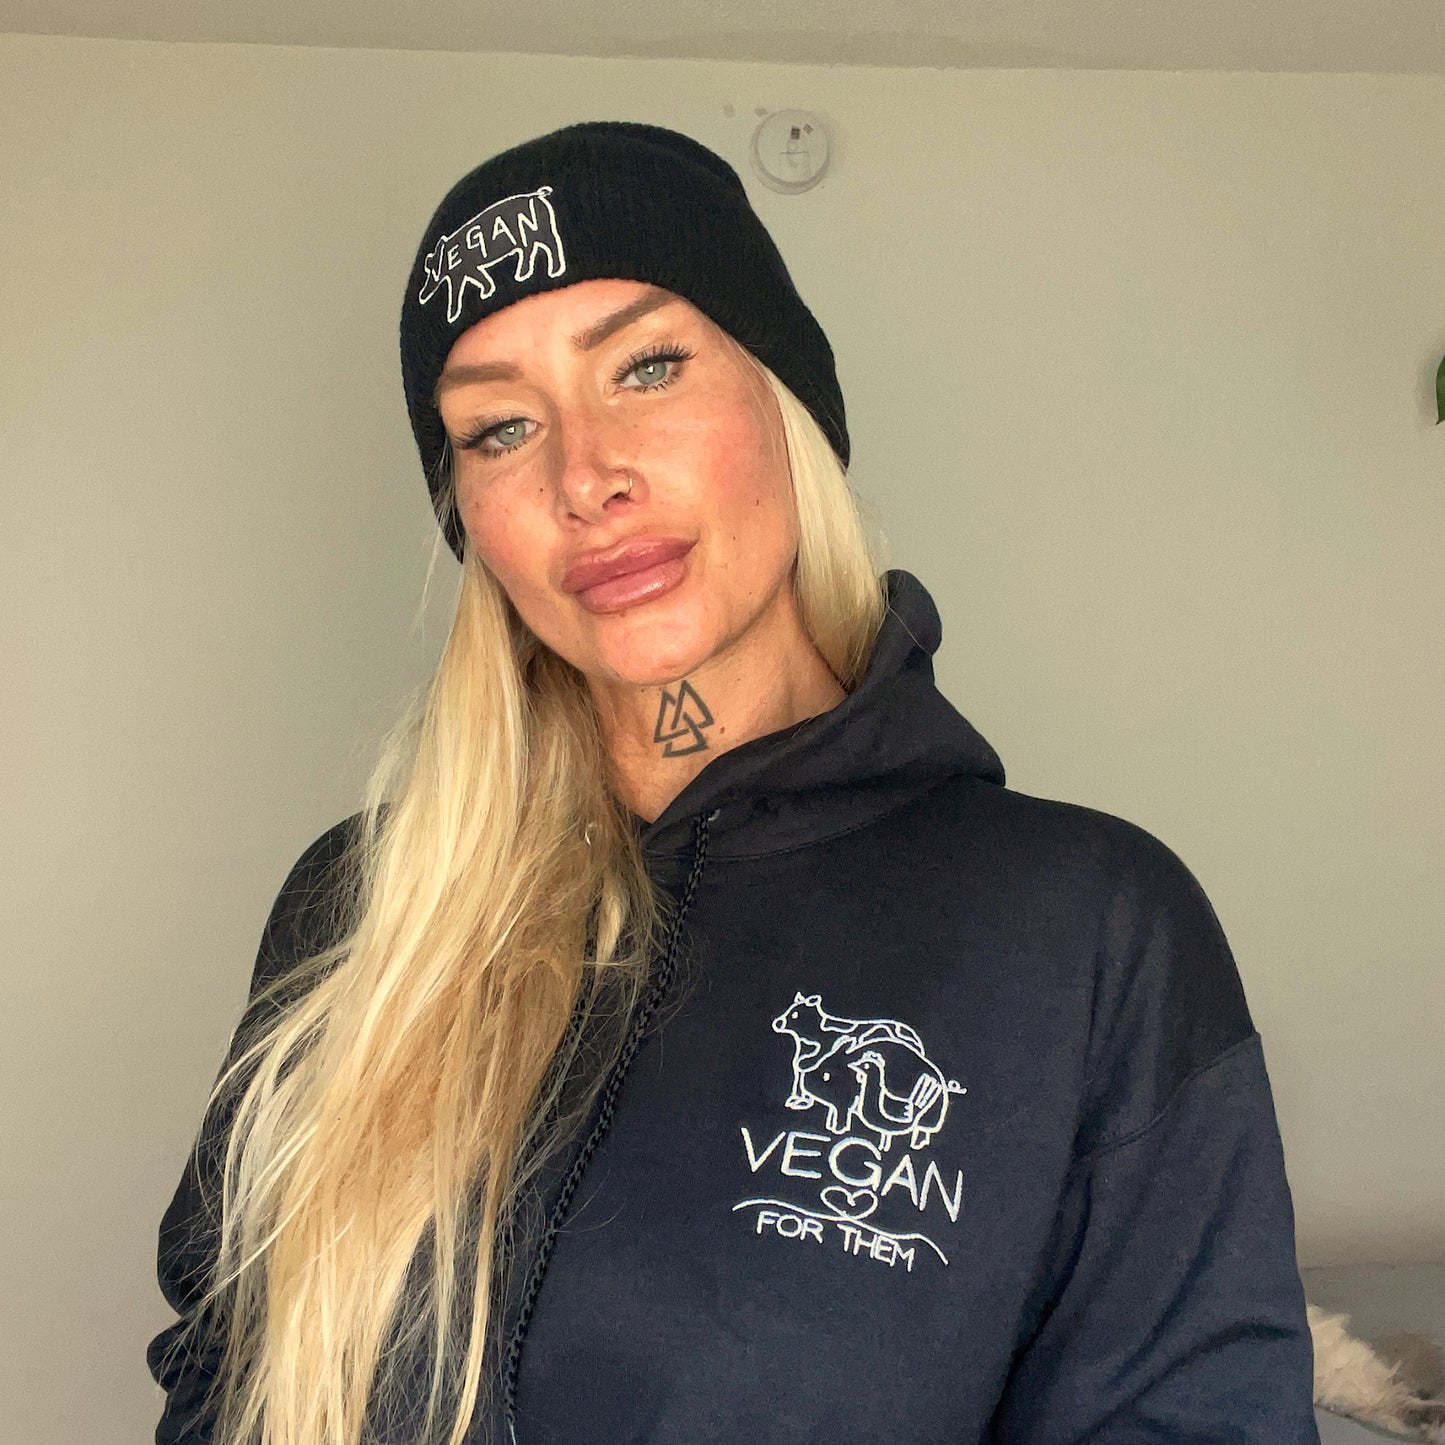 VEGAN For Them Embroidered Unisex Hoodie